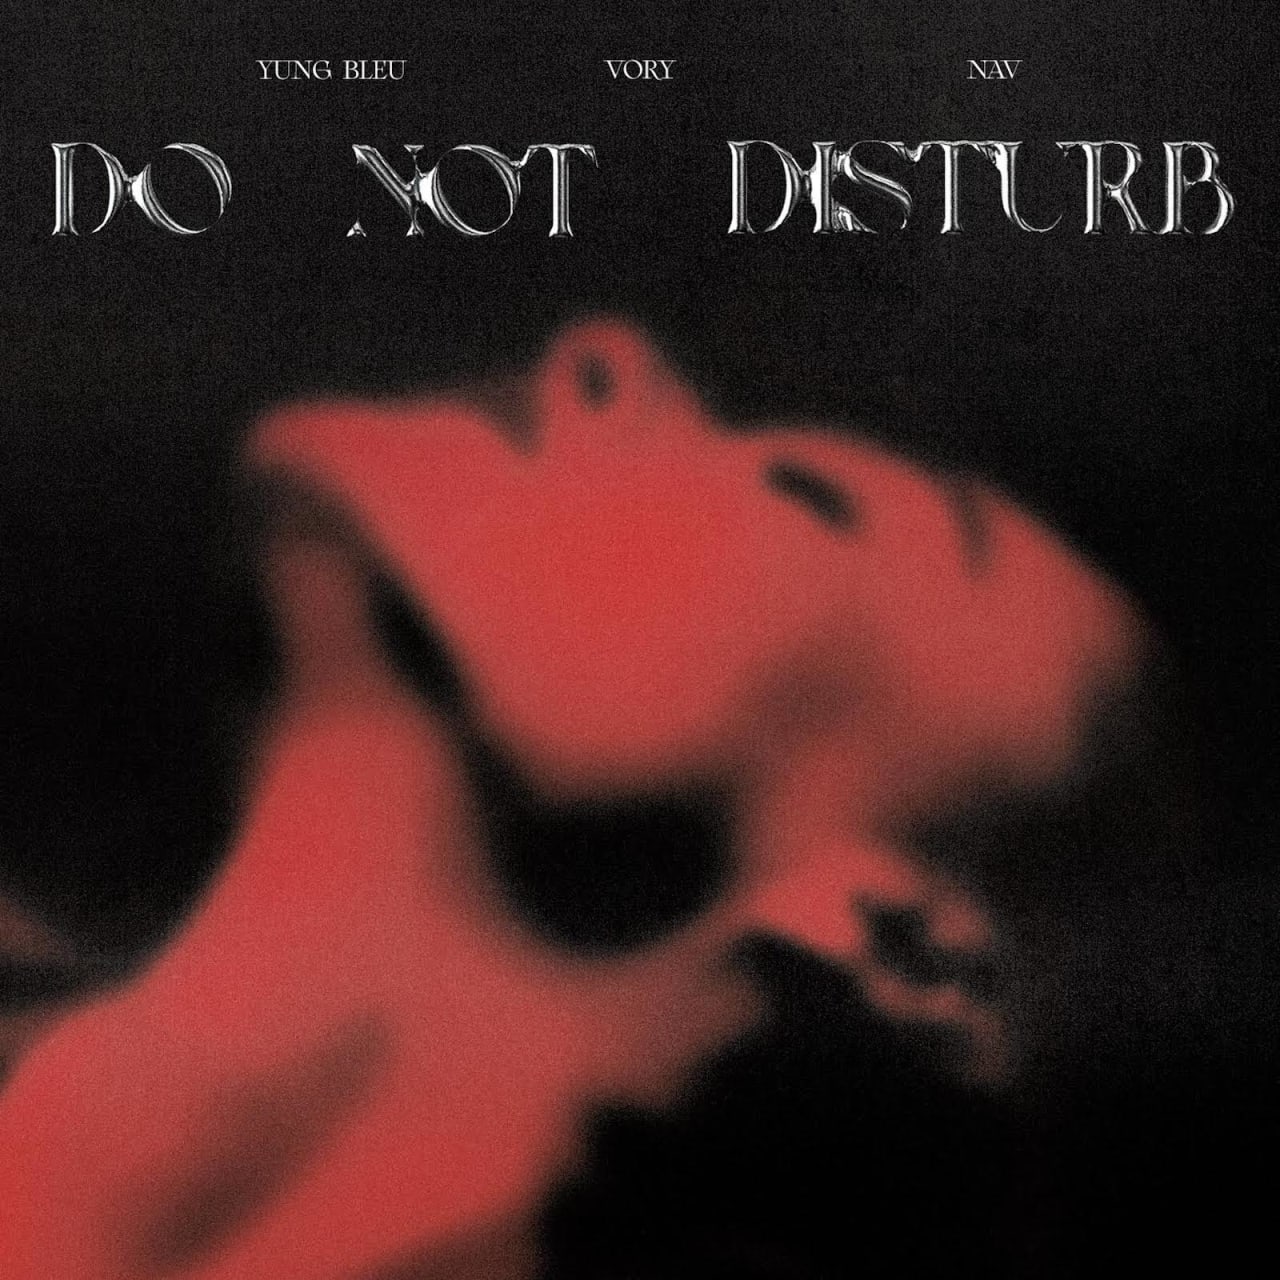 Vory Teams Up with Yung Bleu & NAV on New Single ‘Do Not Disturb’